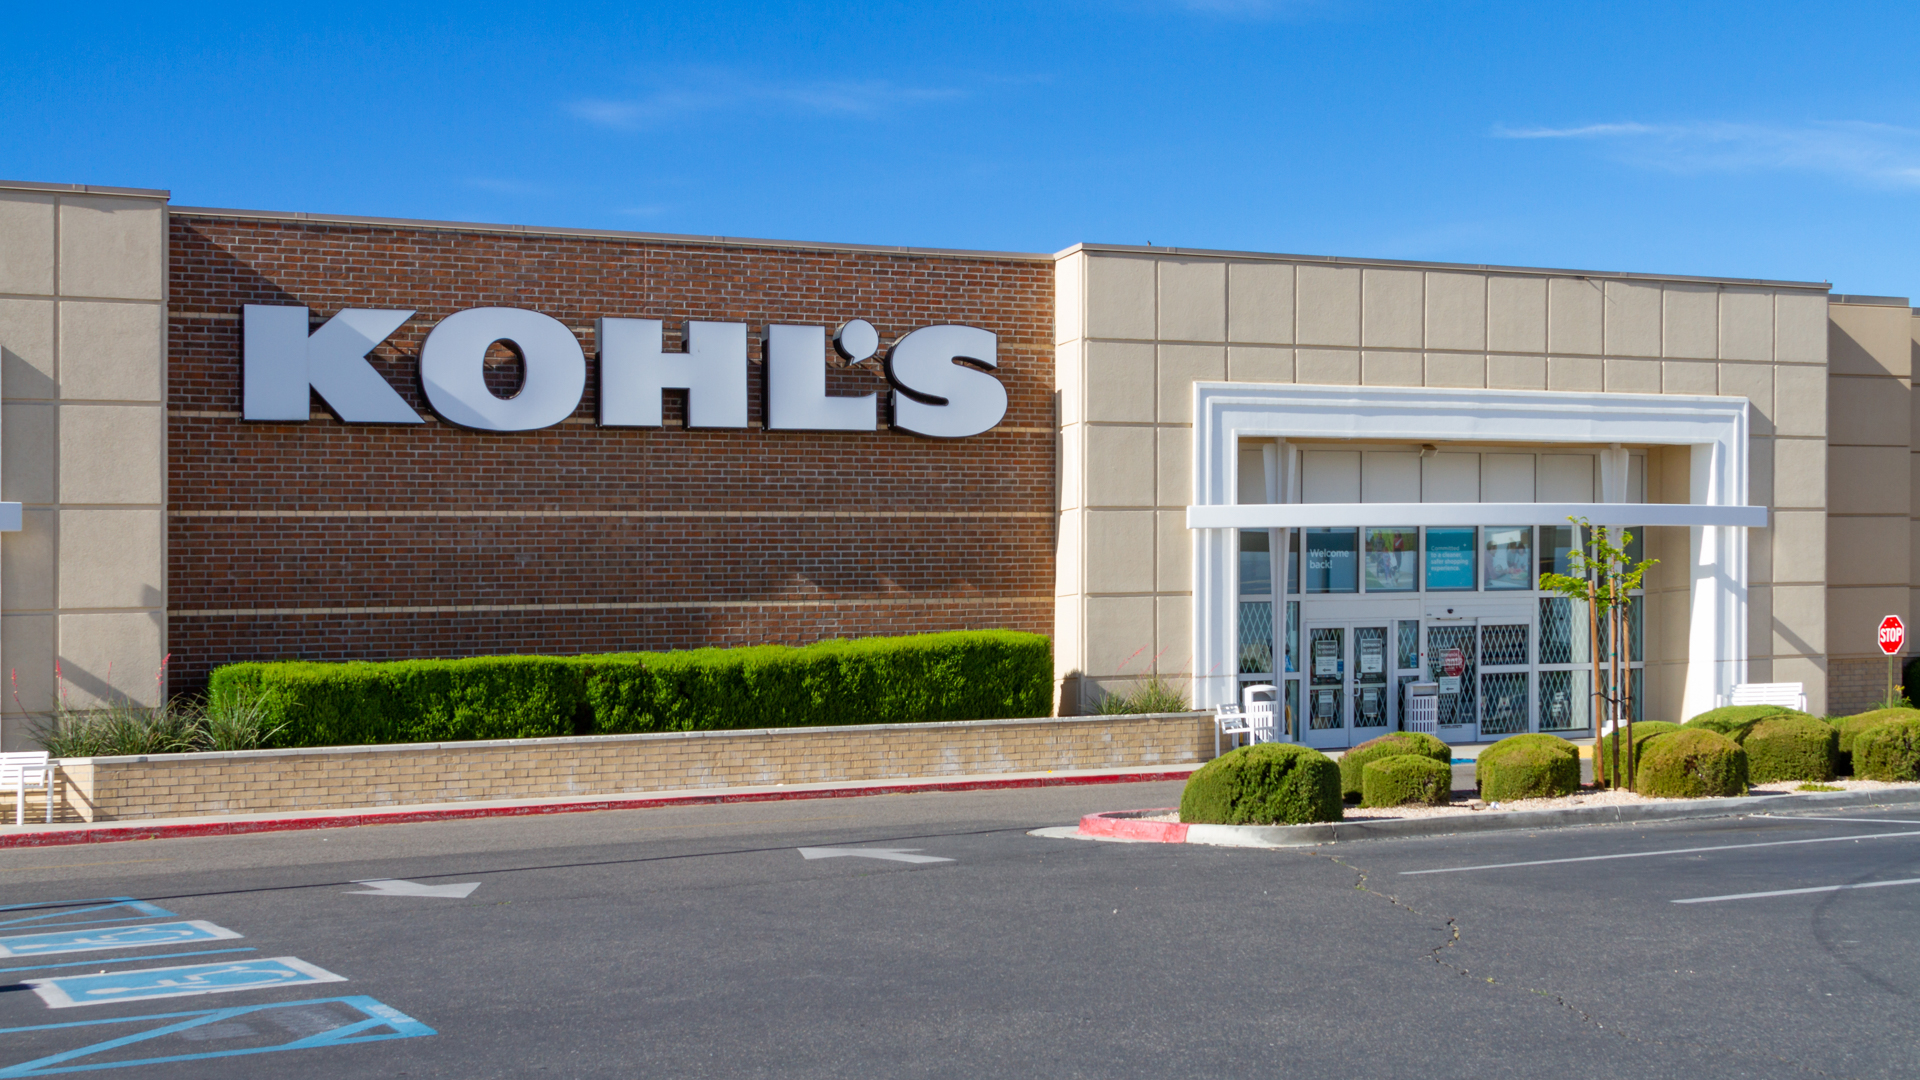 Whats A Kohls Credit Card? I The Pros & Cons 